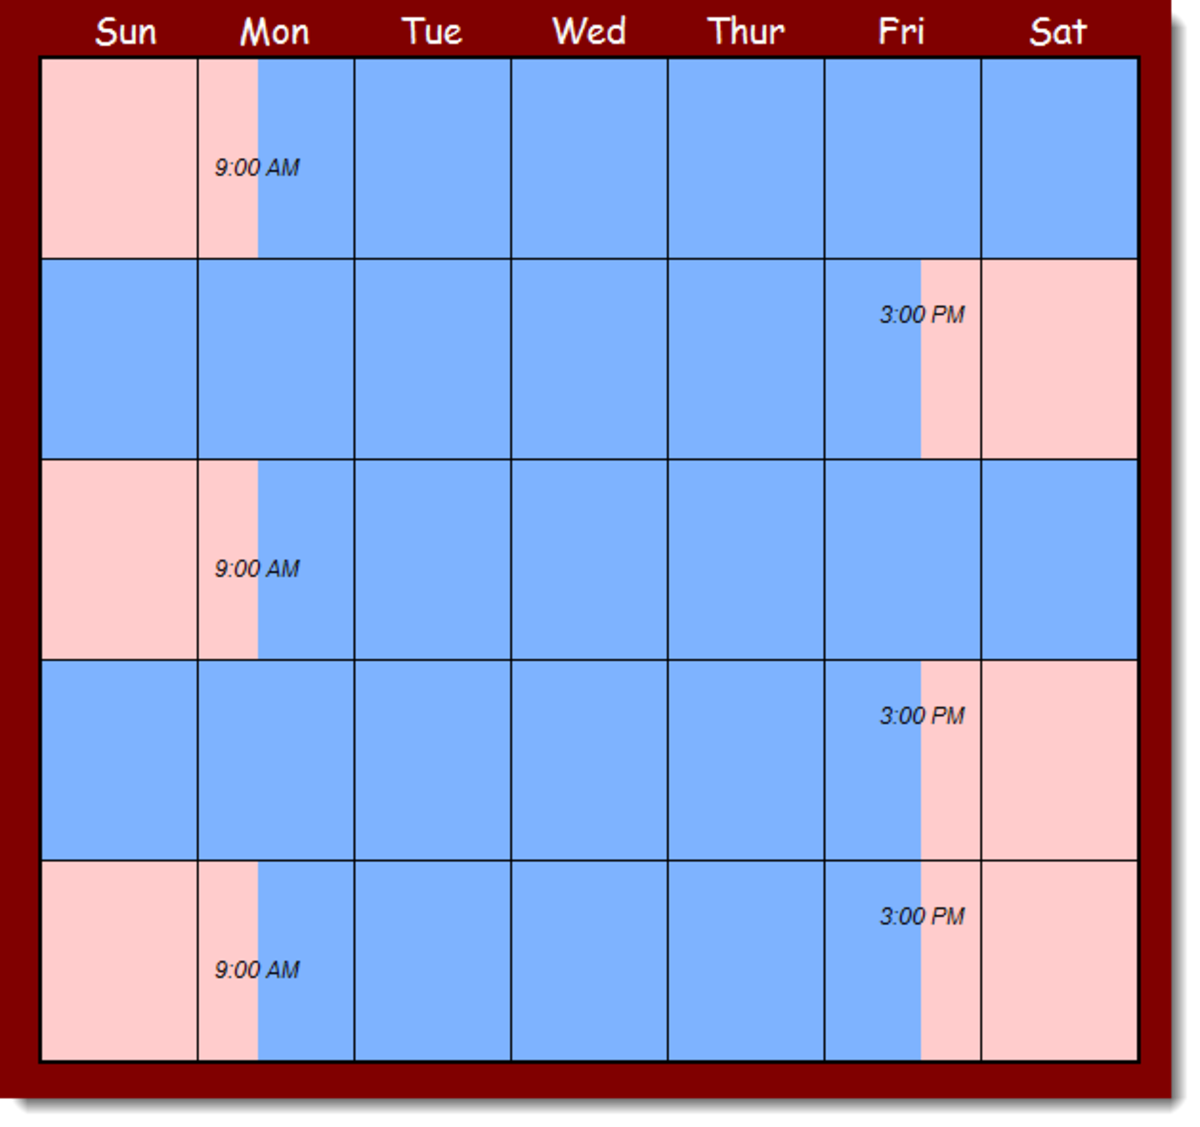 2nd, 4th, and 5th Weekends Custody Schedule